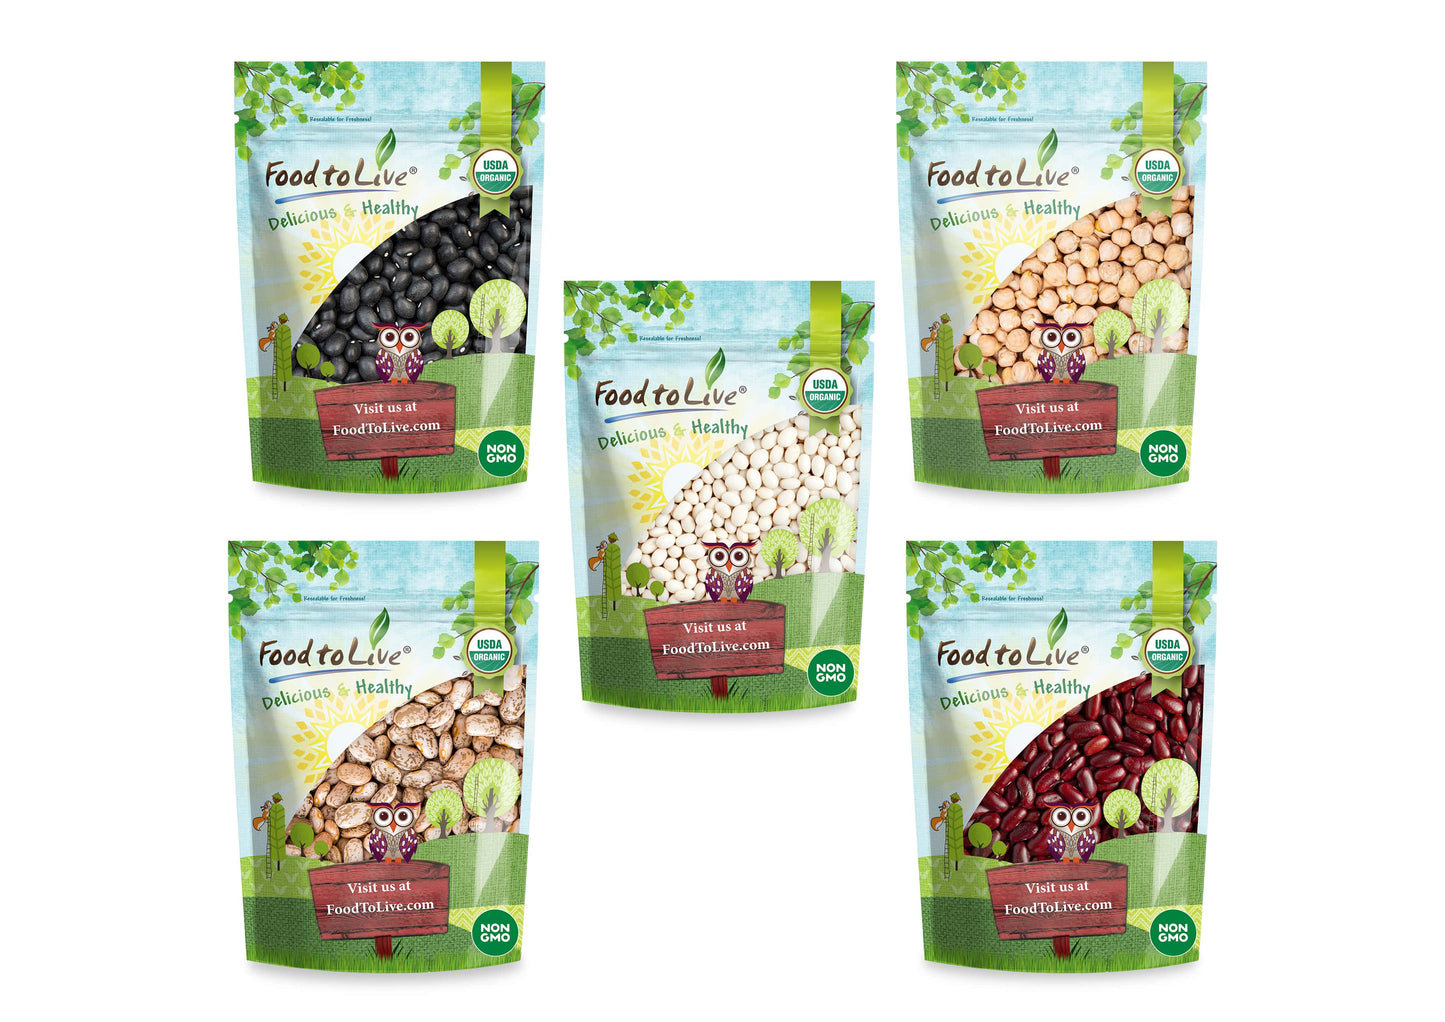 Organic Beans in a Gift Box - A Variety Pack of Pinto Beans, Dark Red Kidney Beans, Black Beans, Navy Beans, Garbanzo Beans-by Food to Live